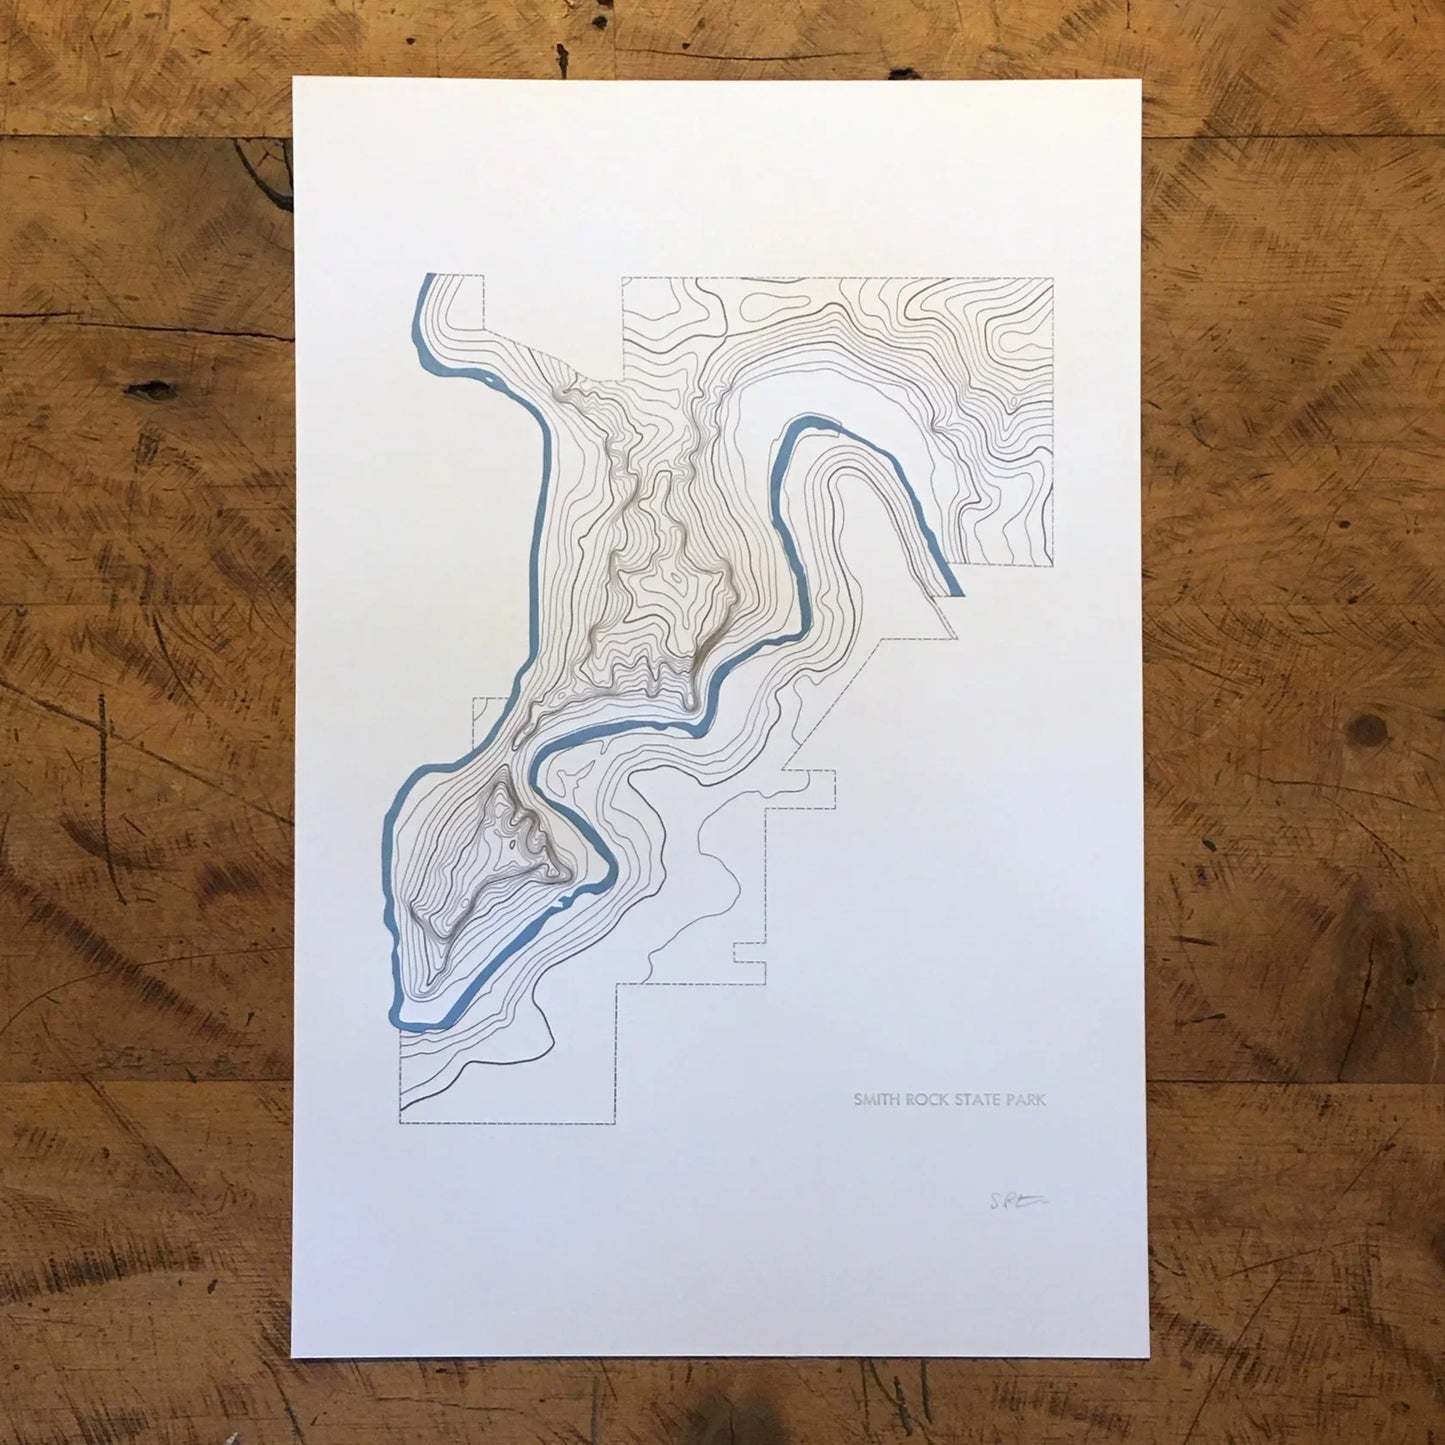 Framed - Smith Rock State Park Topographic Map Letterpress Print by Green Bird Press